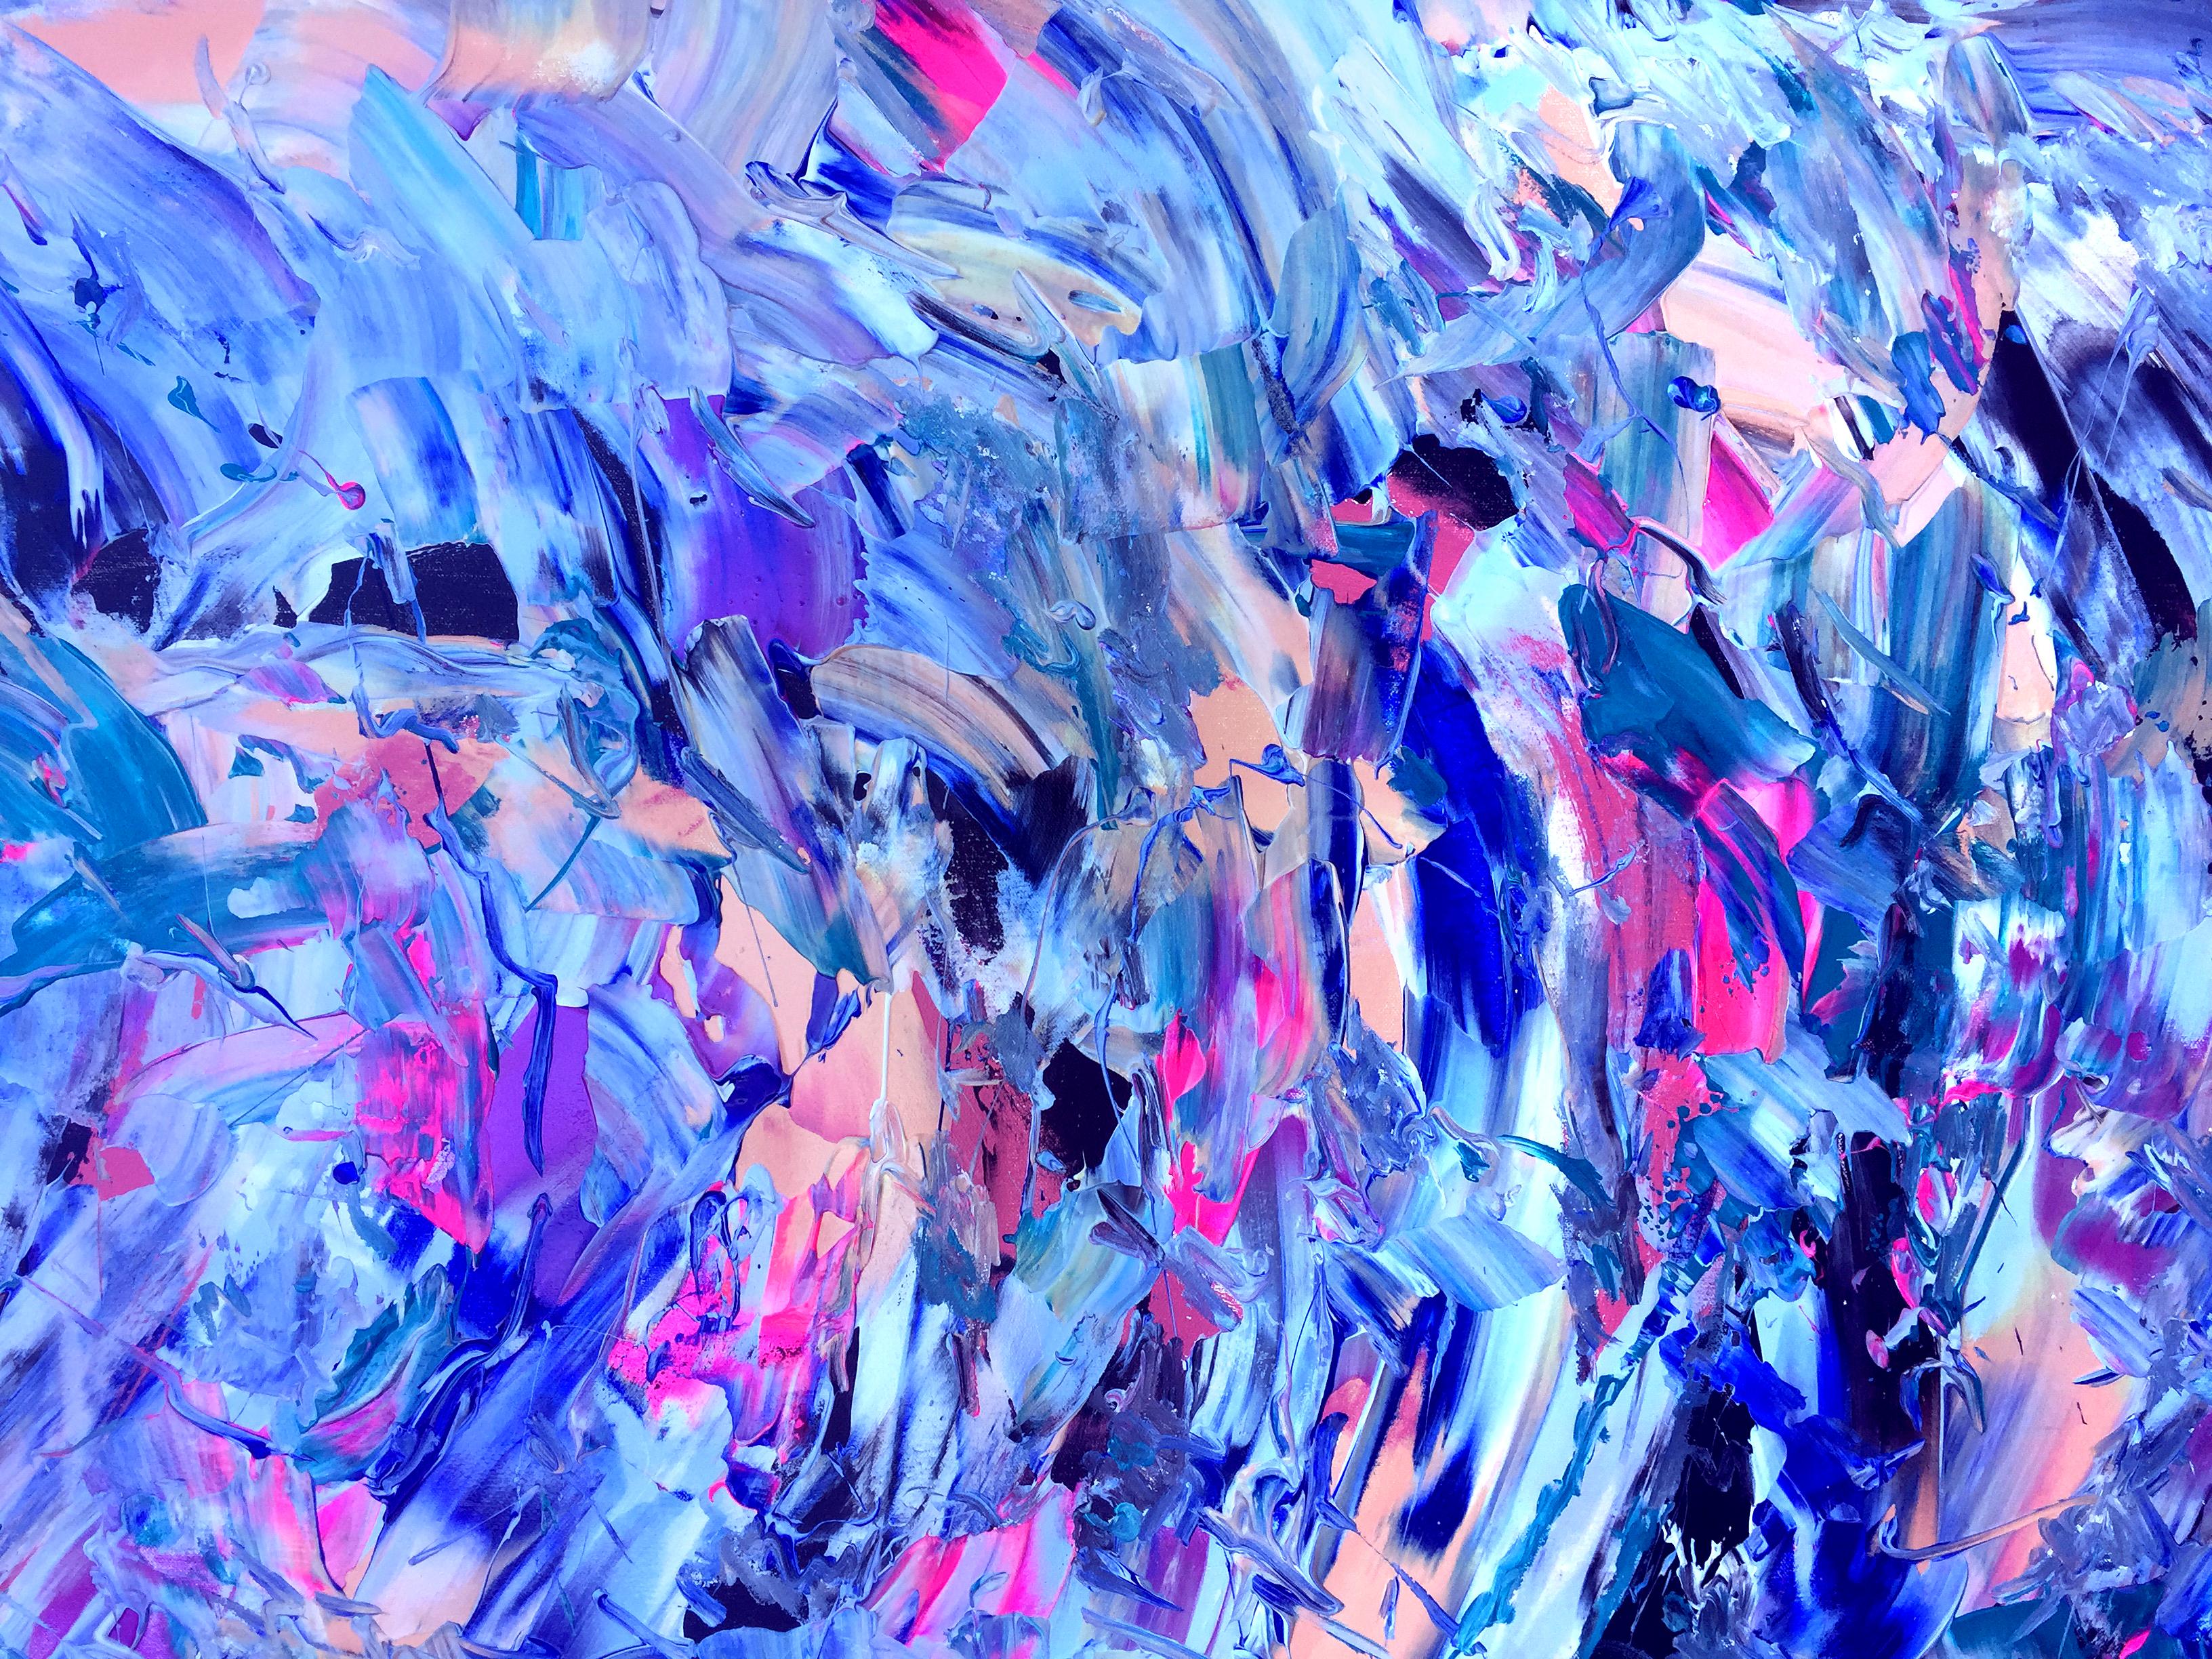 In Motion - Abstract Expressionist Painting by Estelle Asmodelle